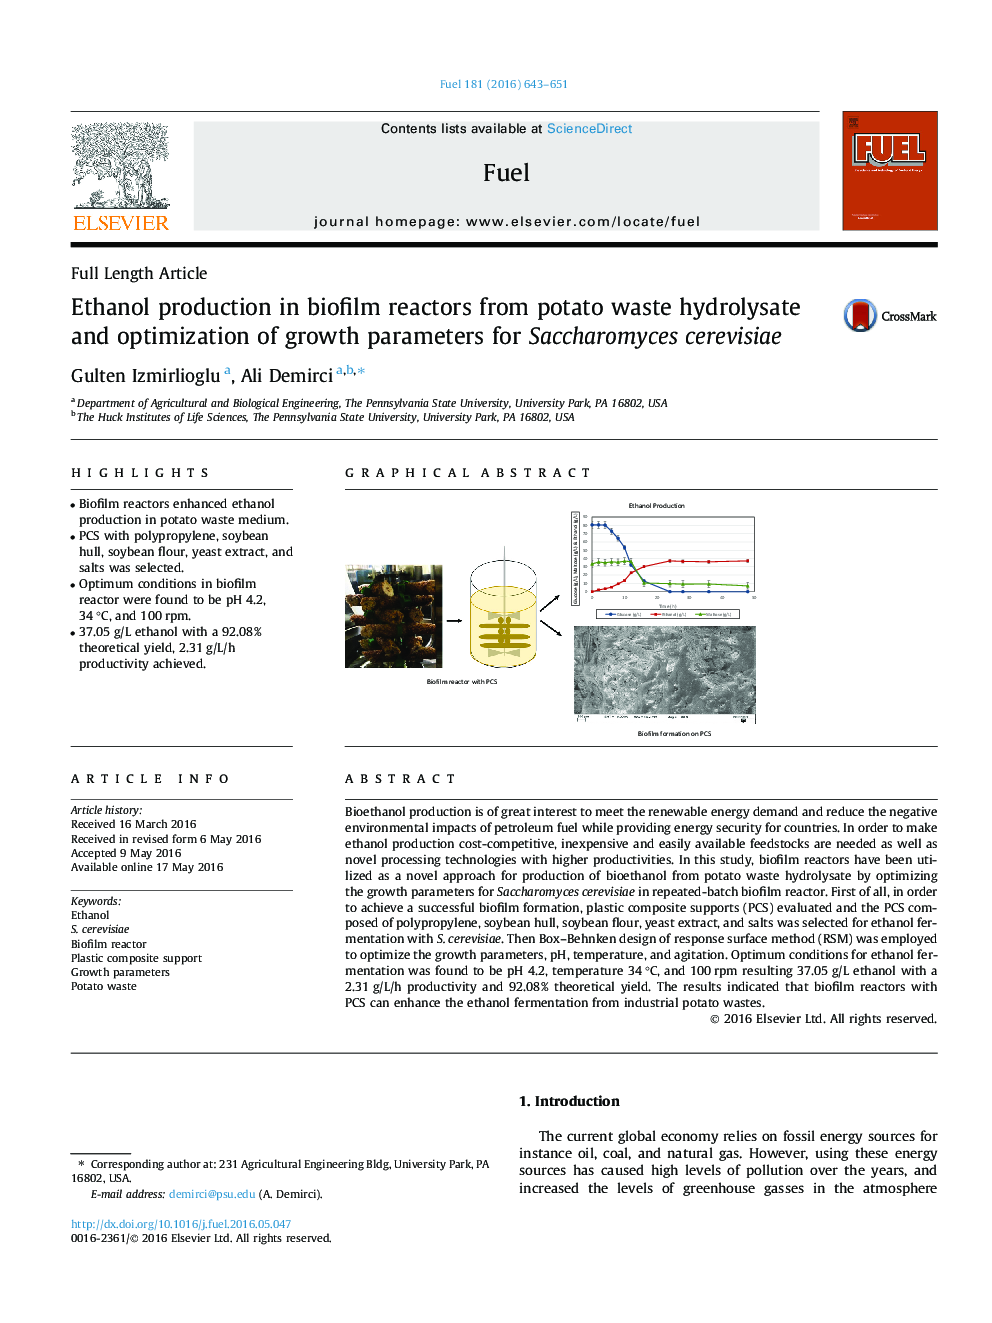 Ethanol production in biofilm reactors from potato waste hydrolysate and optimization of growth parameters for Saccharomyces cerevisiae